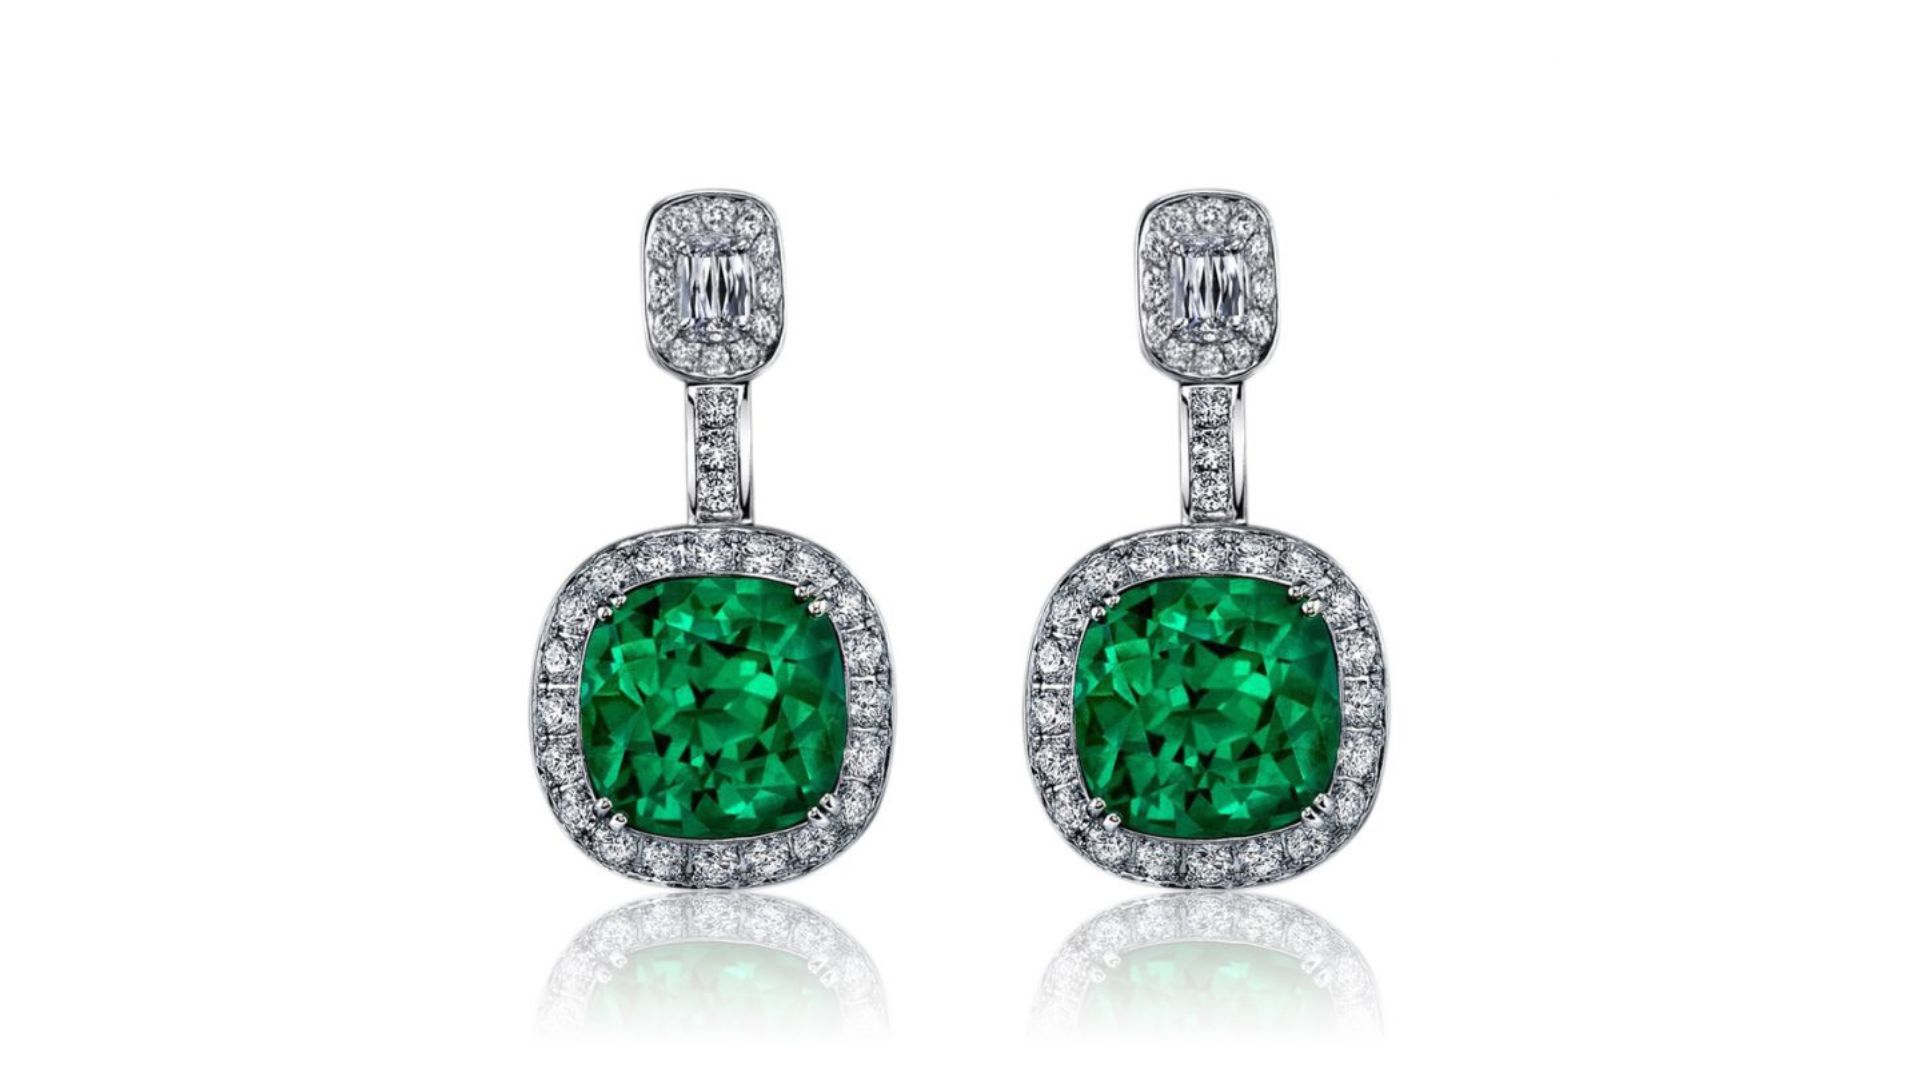 Green Color Stone Embedded In Earring